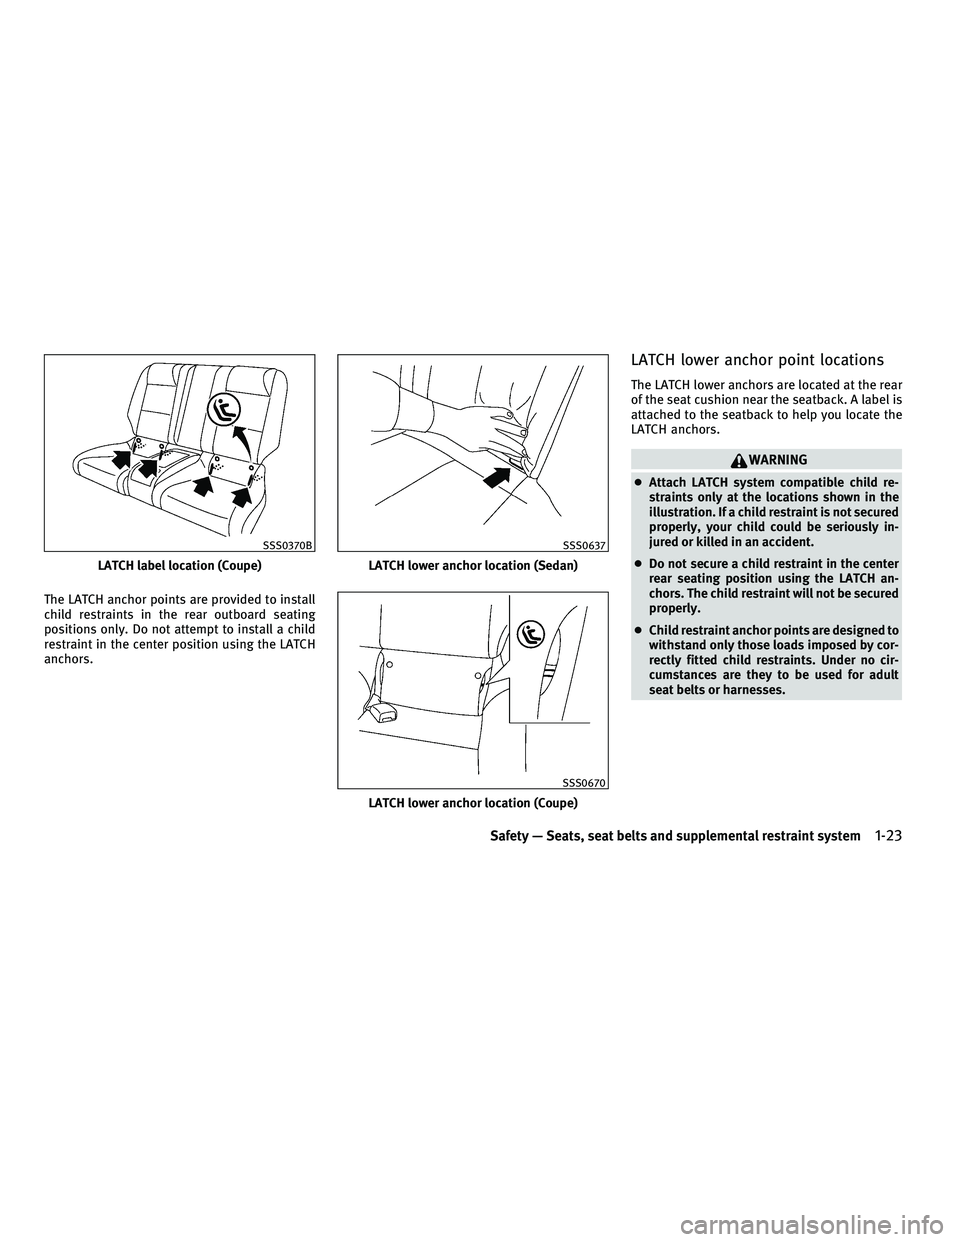 INFINITI G 2010  Owners Manual The LATCH anchor points are provided to install
child restraints in the rear outboard seating
positions only. Do not attempt to install a child
restraint in the center position using the LATCH
anchors